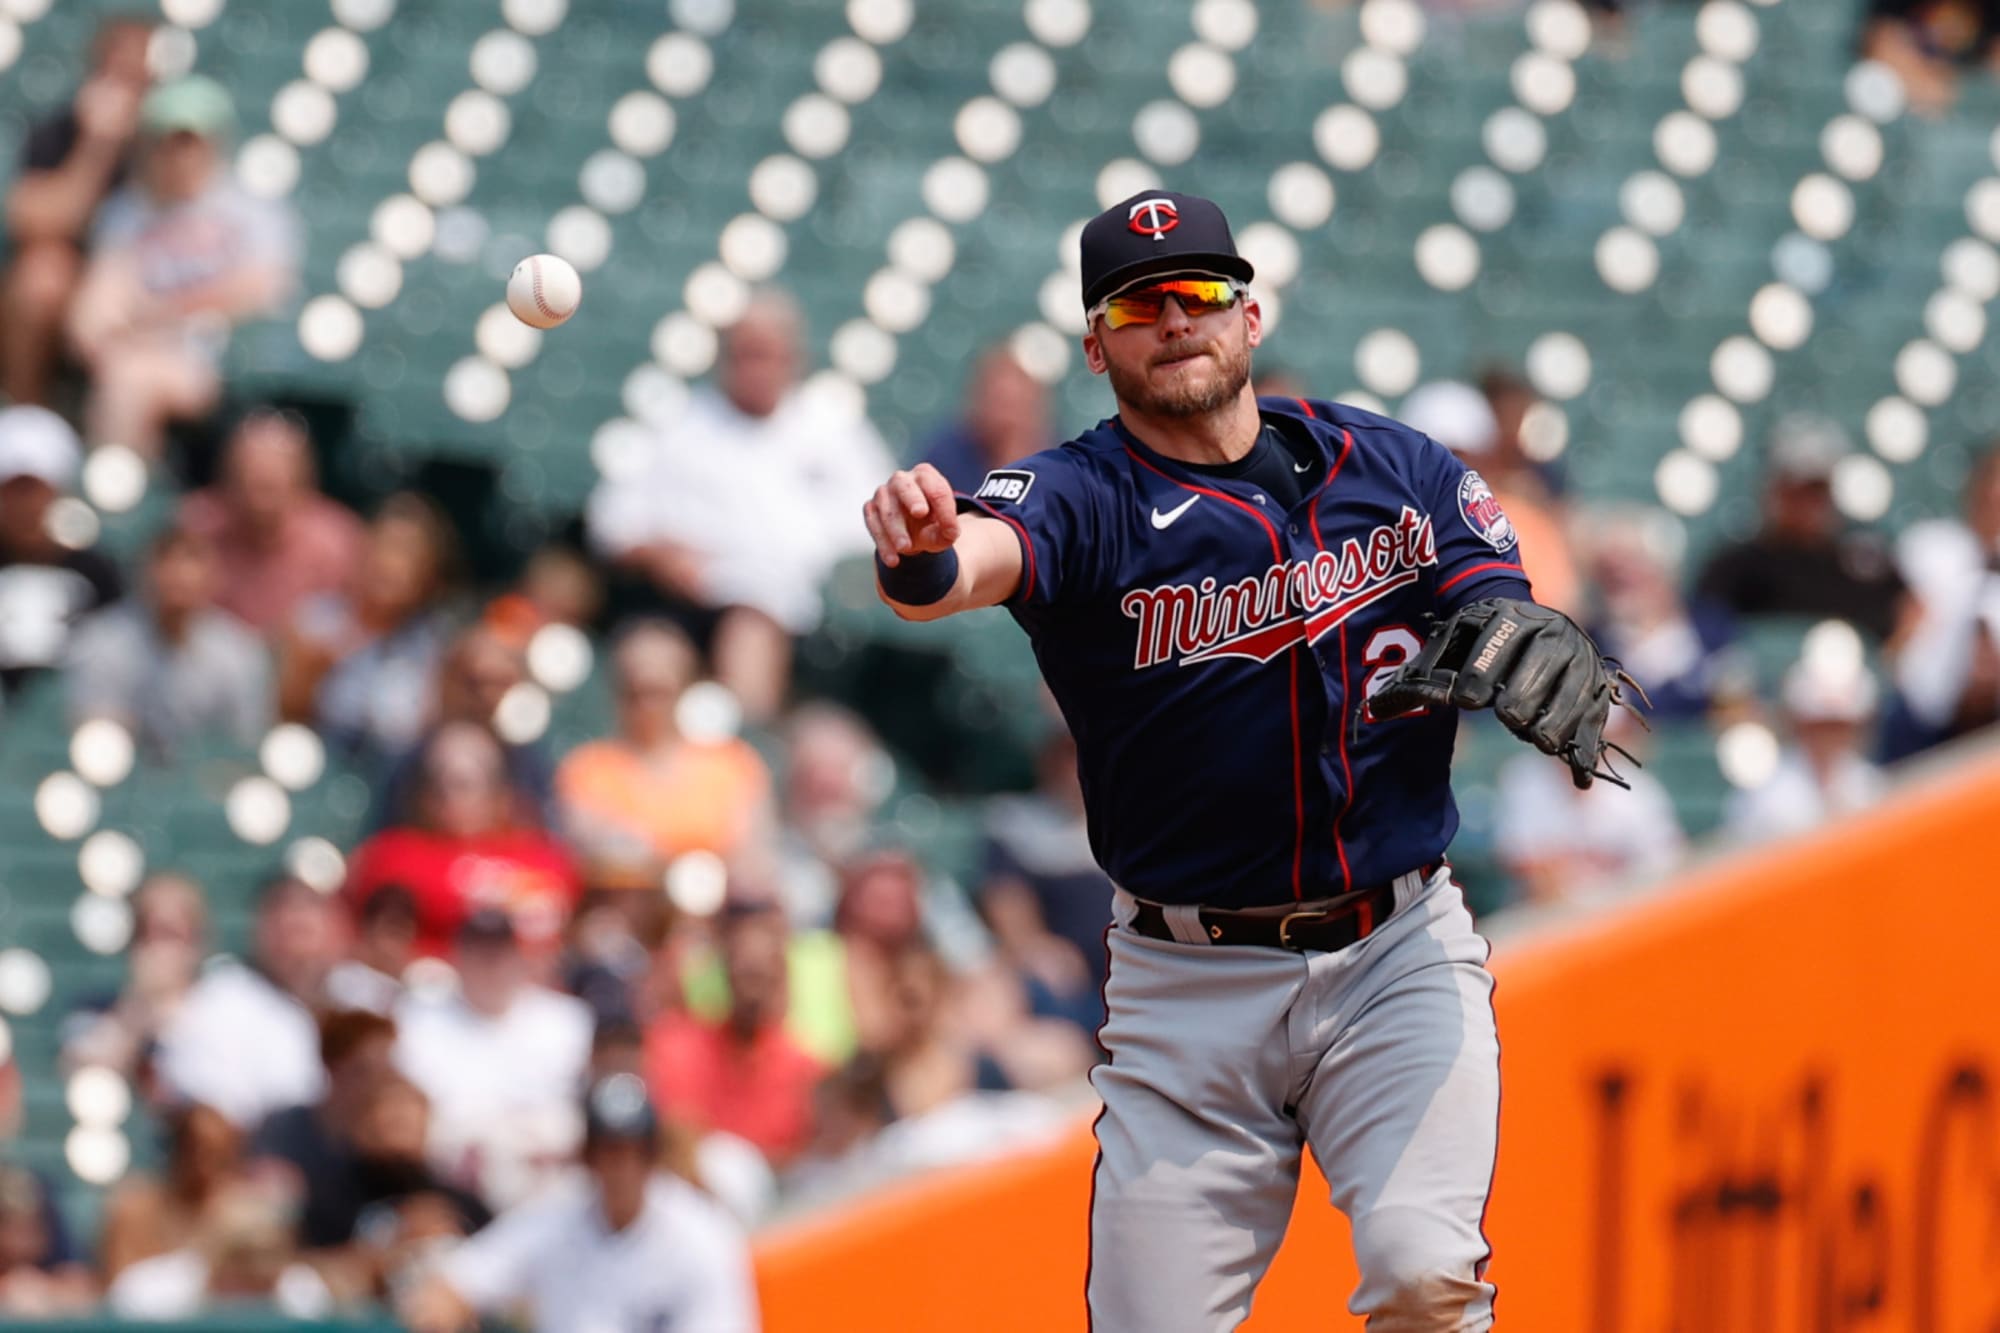 Minnesota Twins: A look at the 2019 season, by the numbers